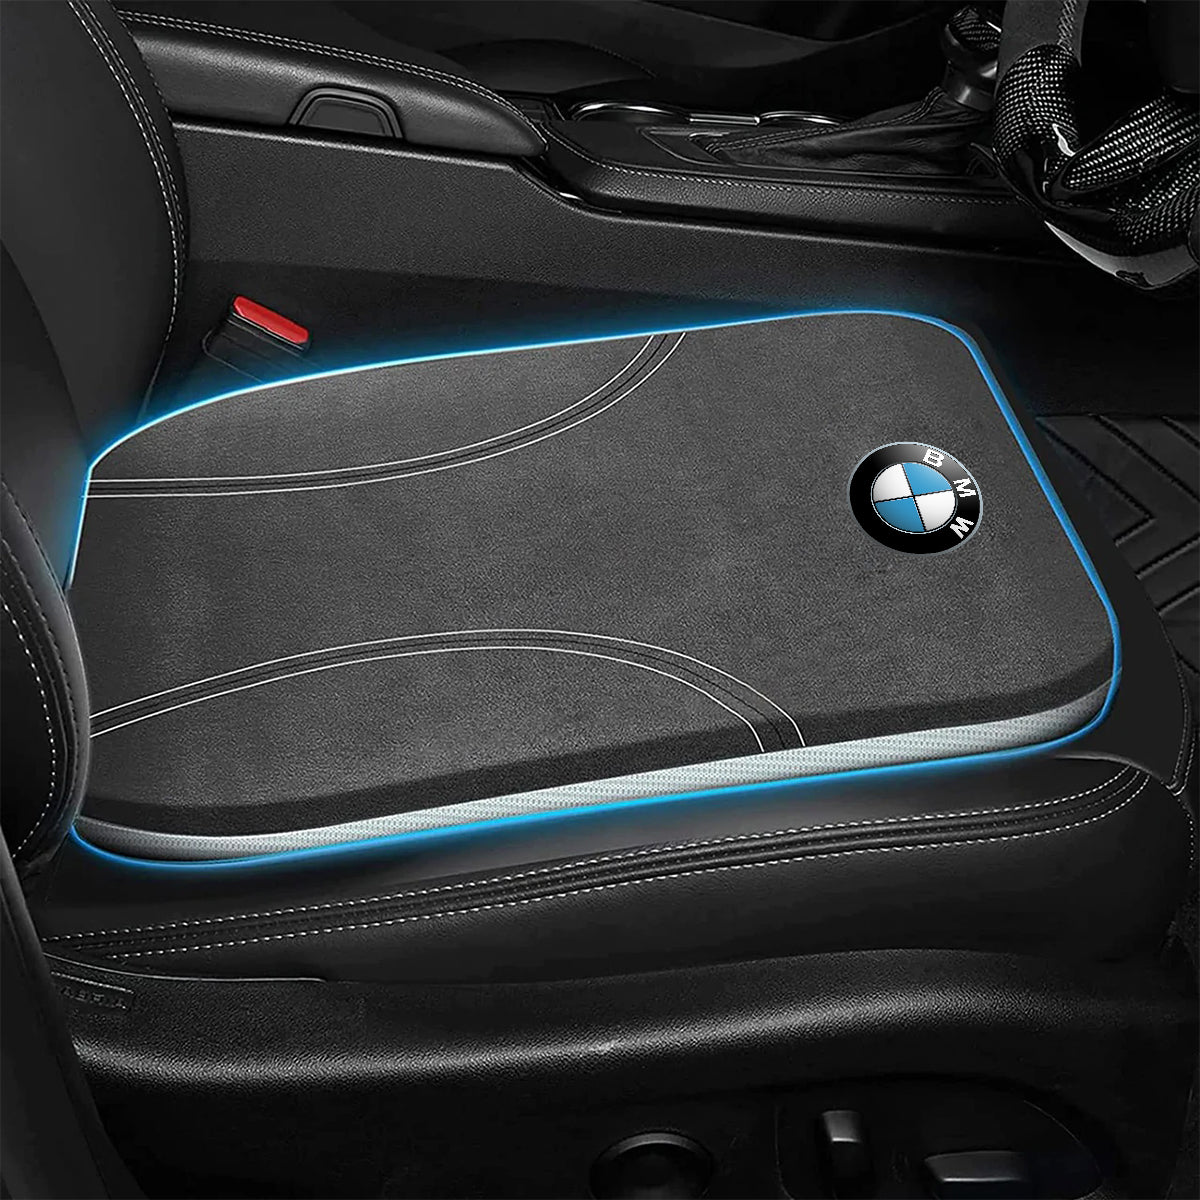 BMW Car Seat Cushion: Enhance Comfort and Support for Your Drive